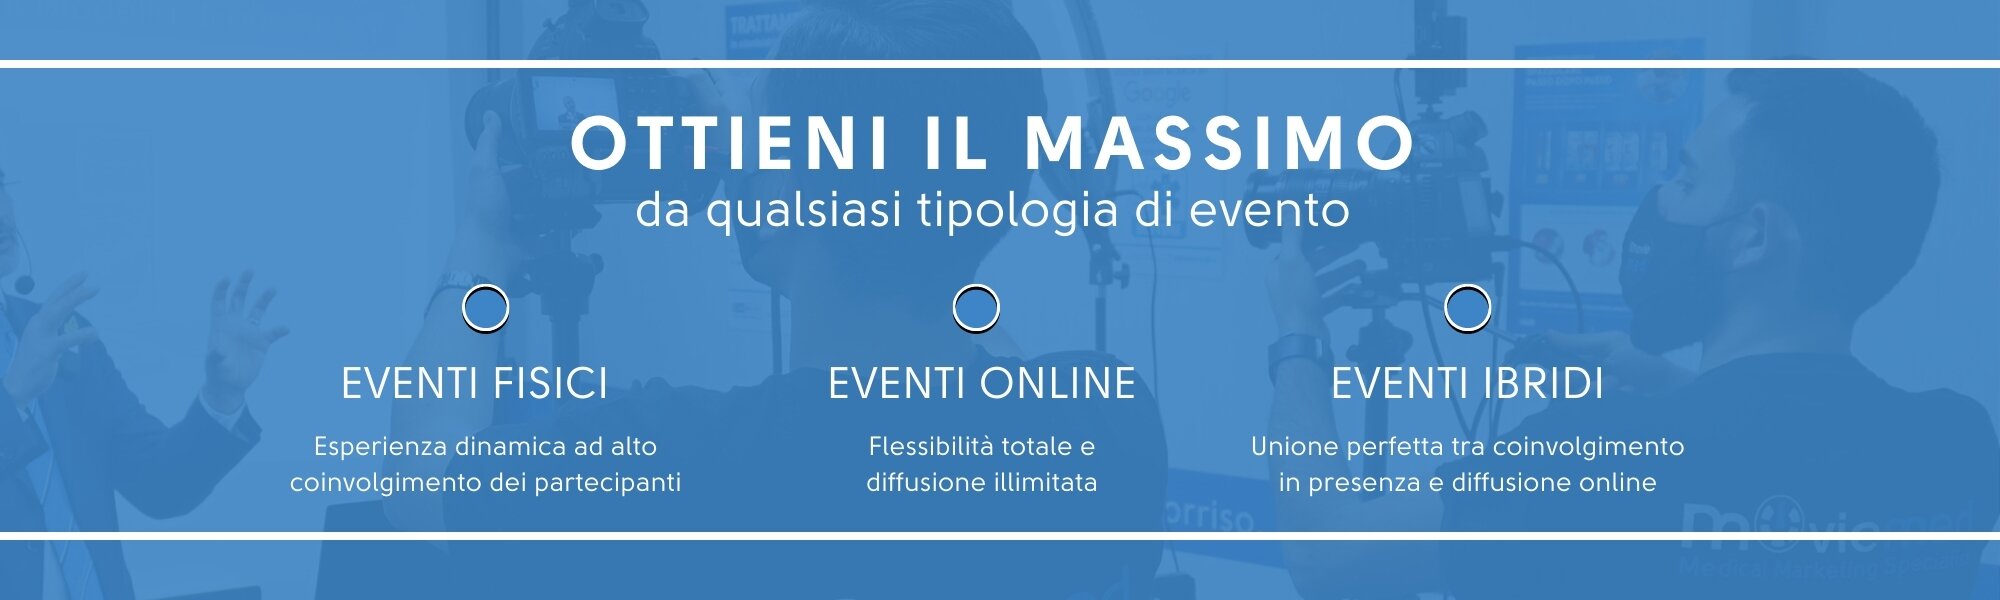 tipologie eventi moviemed communication